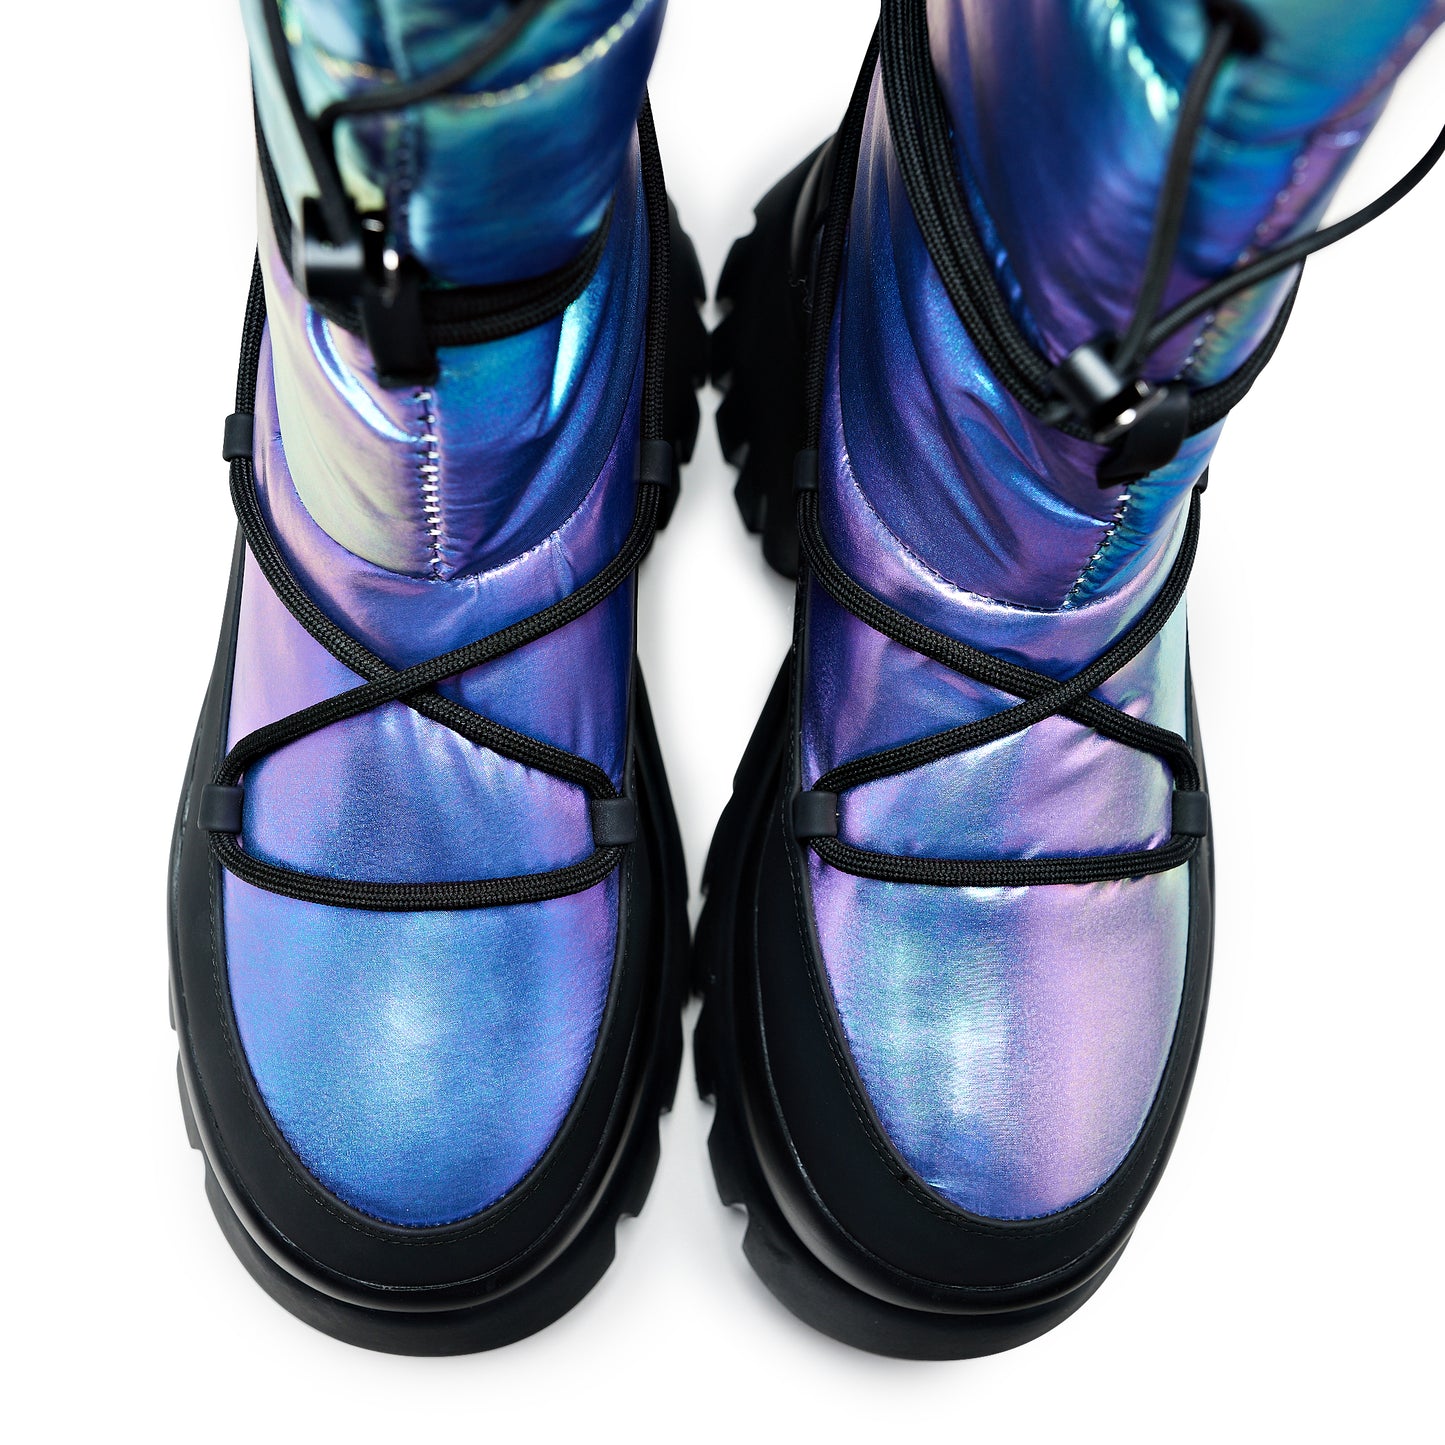 A Glass Mirage Snow Boots - Rainbow - Ankle Boots - KOI Footwear - Multi - Top View